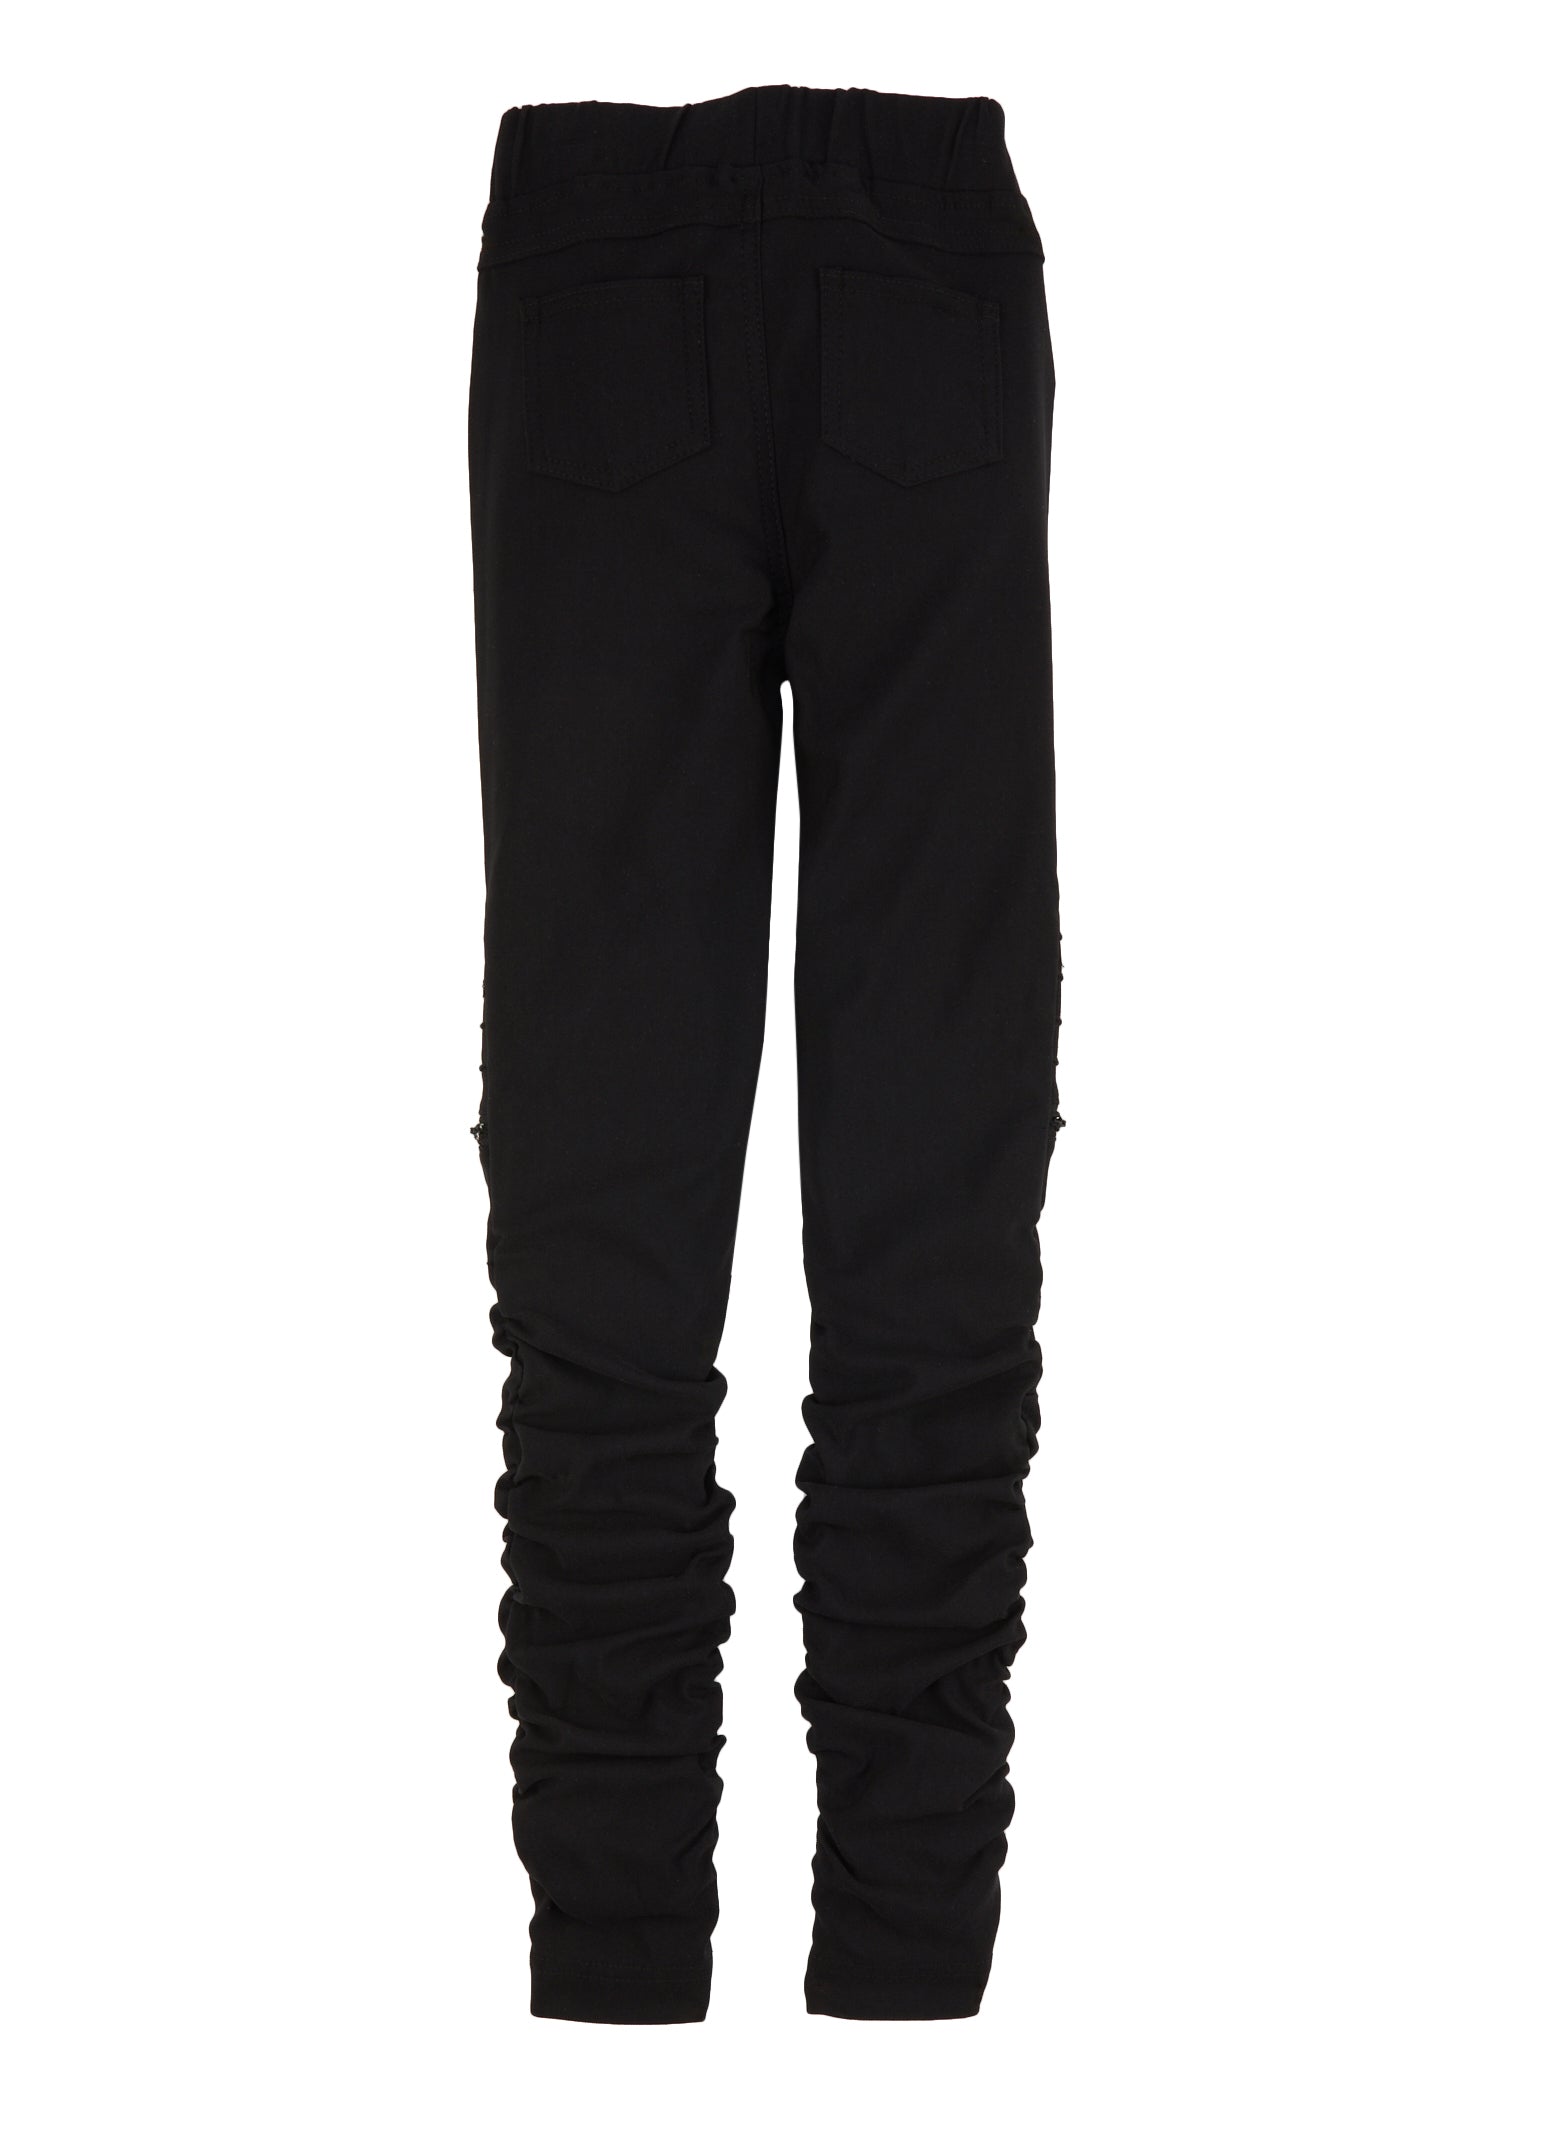 Girls Hyperstretch Stacked Moto Pants